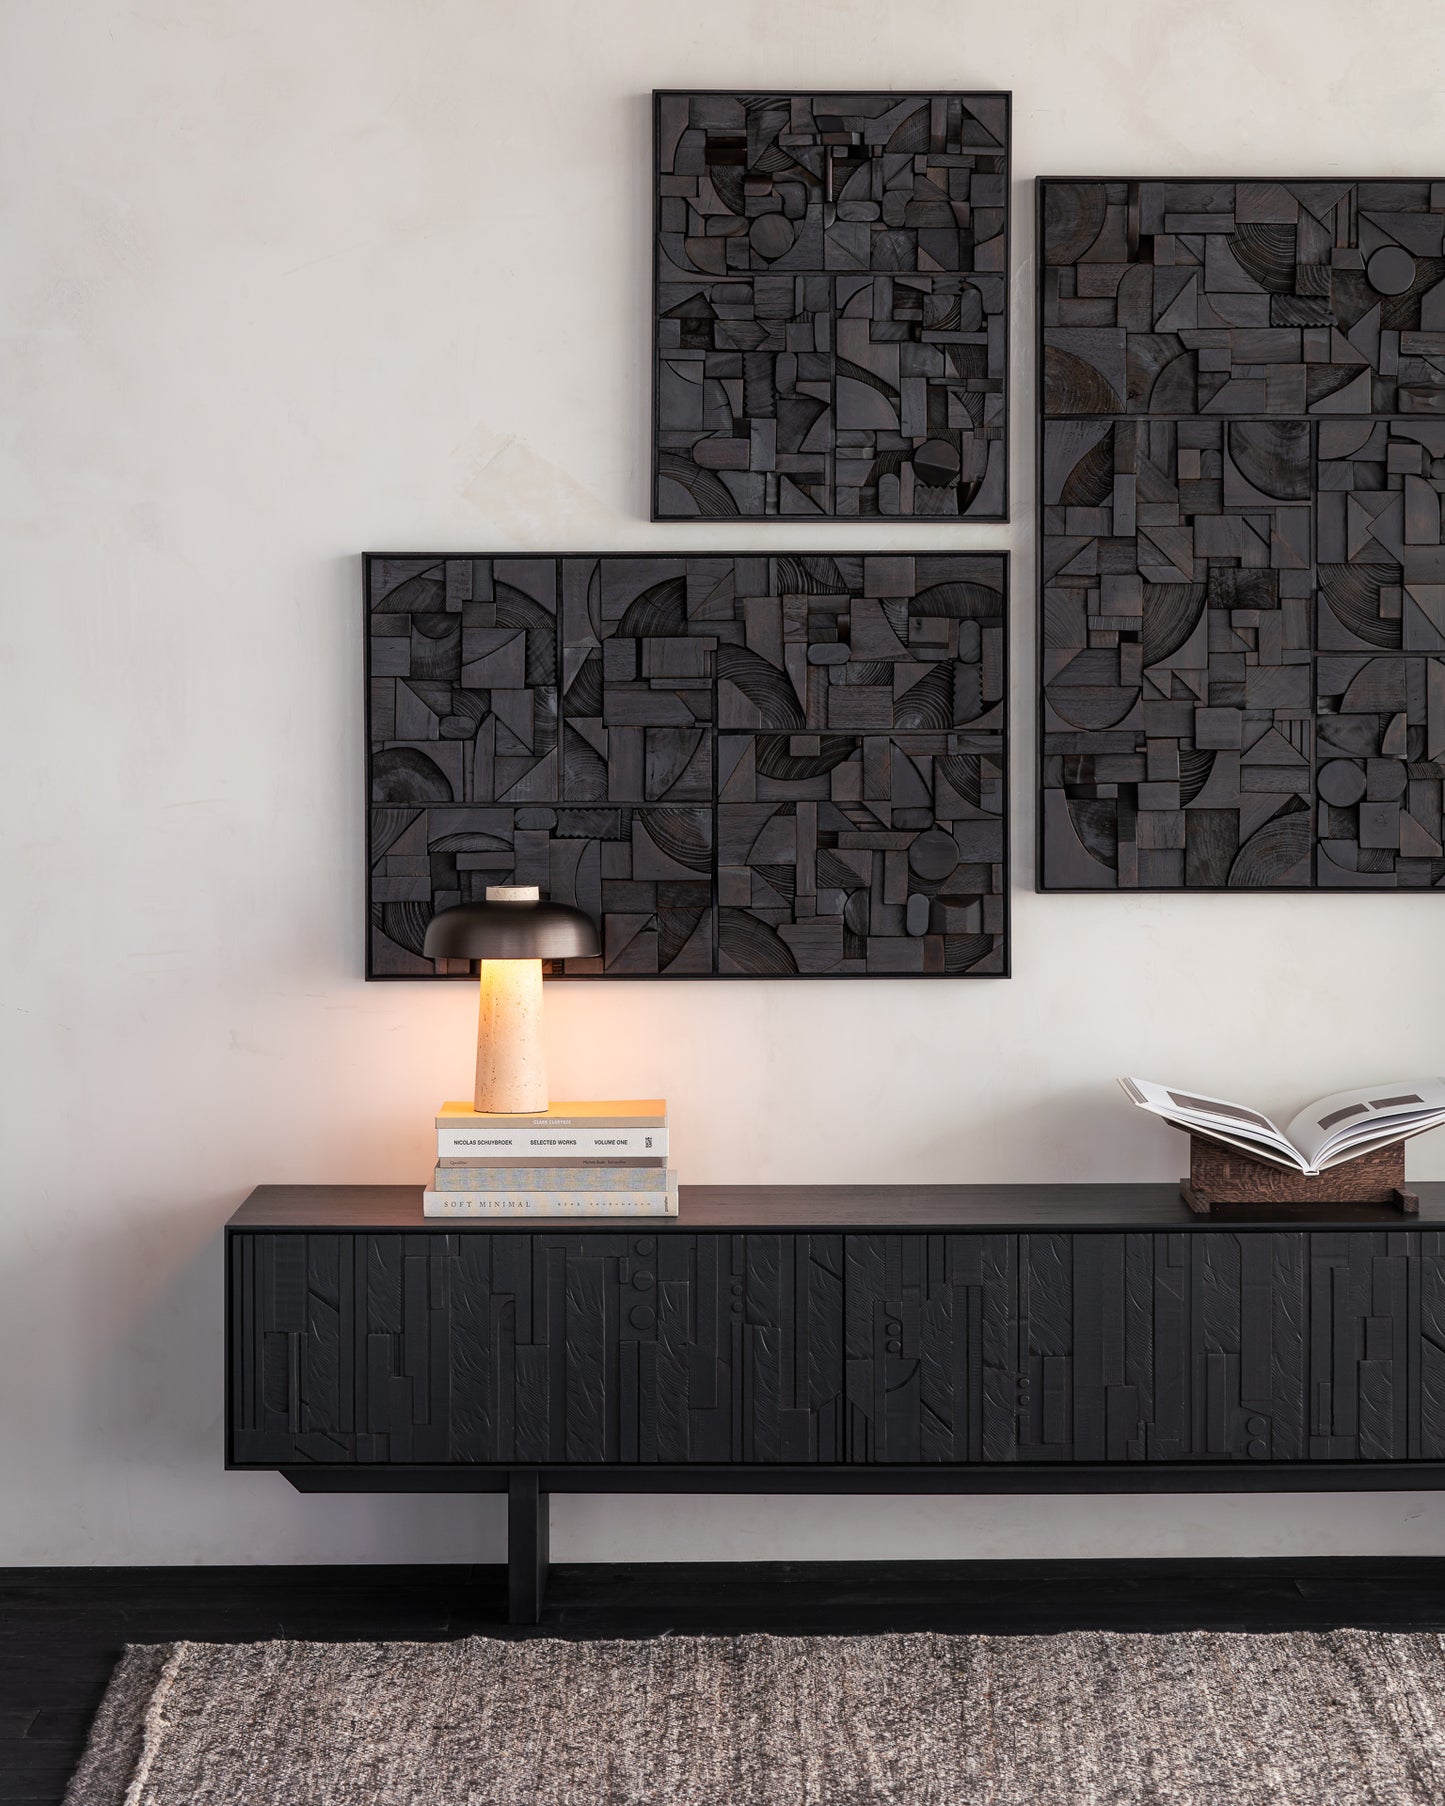 Ethnicraft Teak Mosaic TV Cupoard Unit is available from Make Your House A Home, Bendigo, Victoria, Australia